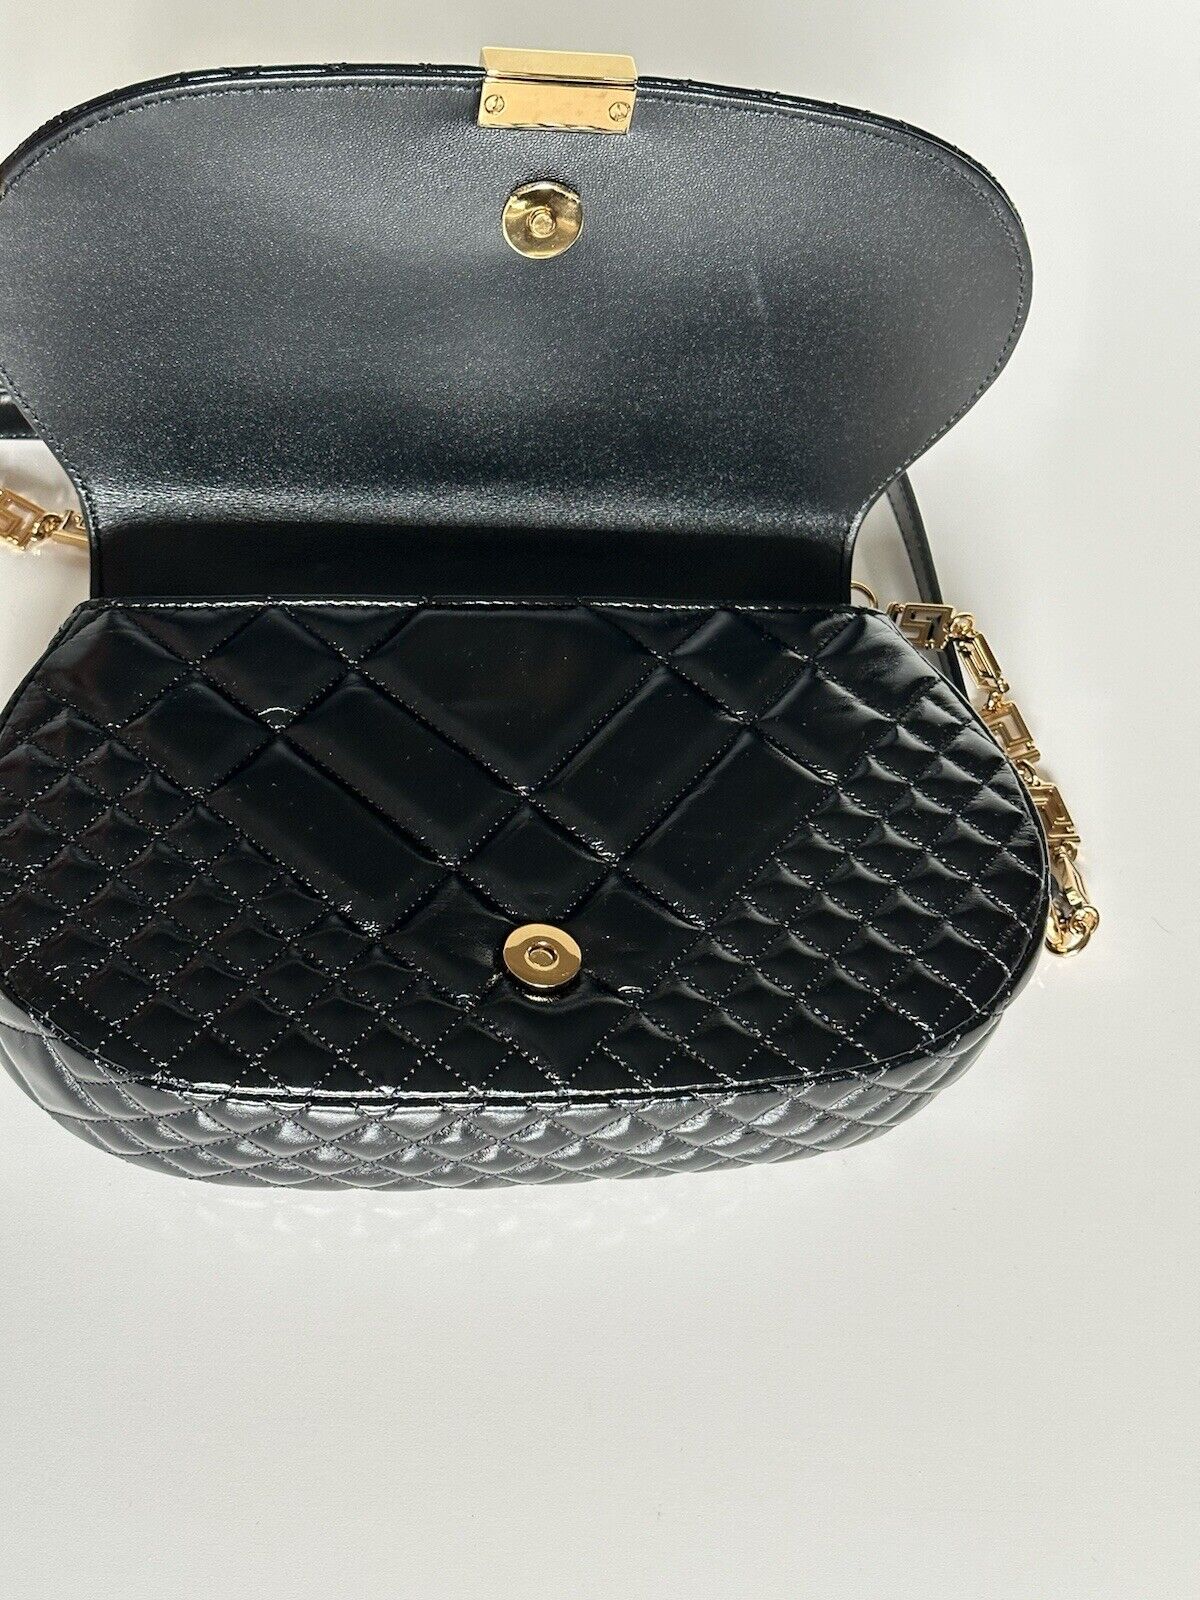 Versace Quilted Calf Leather Black Medium Shoulder Bag 1011178 IT NWT $2995